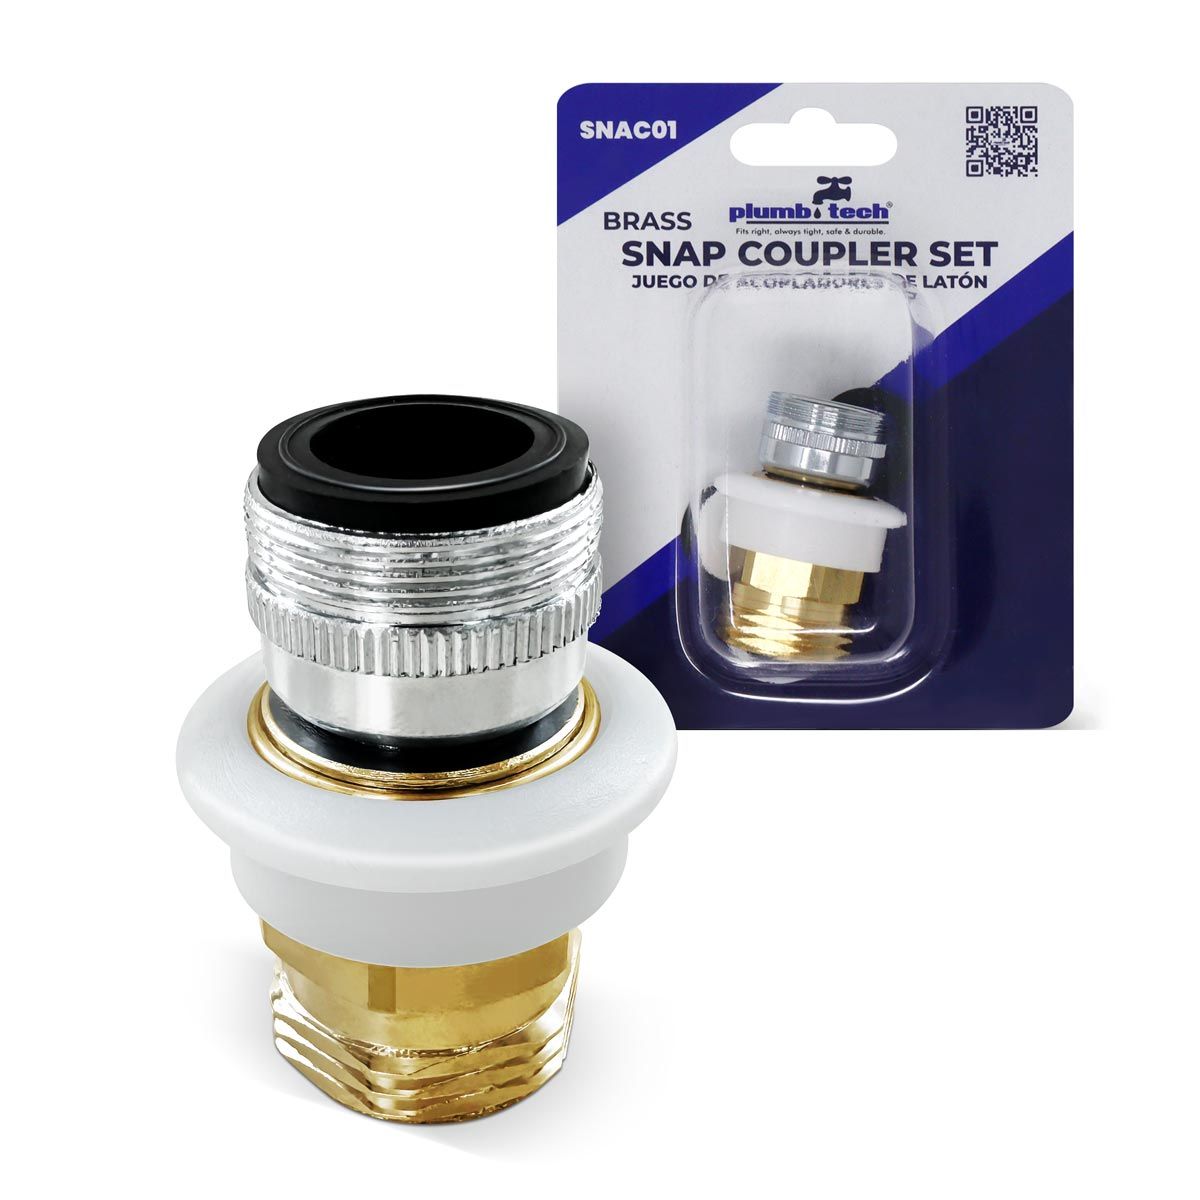 small-snap-coupler-and-adapter-set-snac01-3